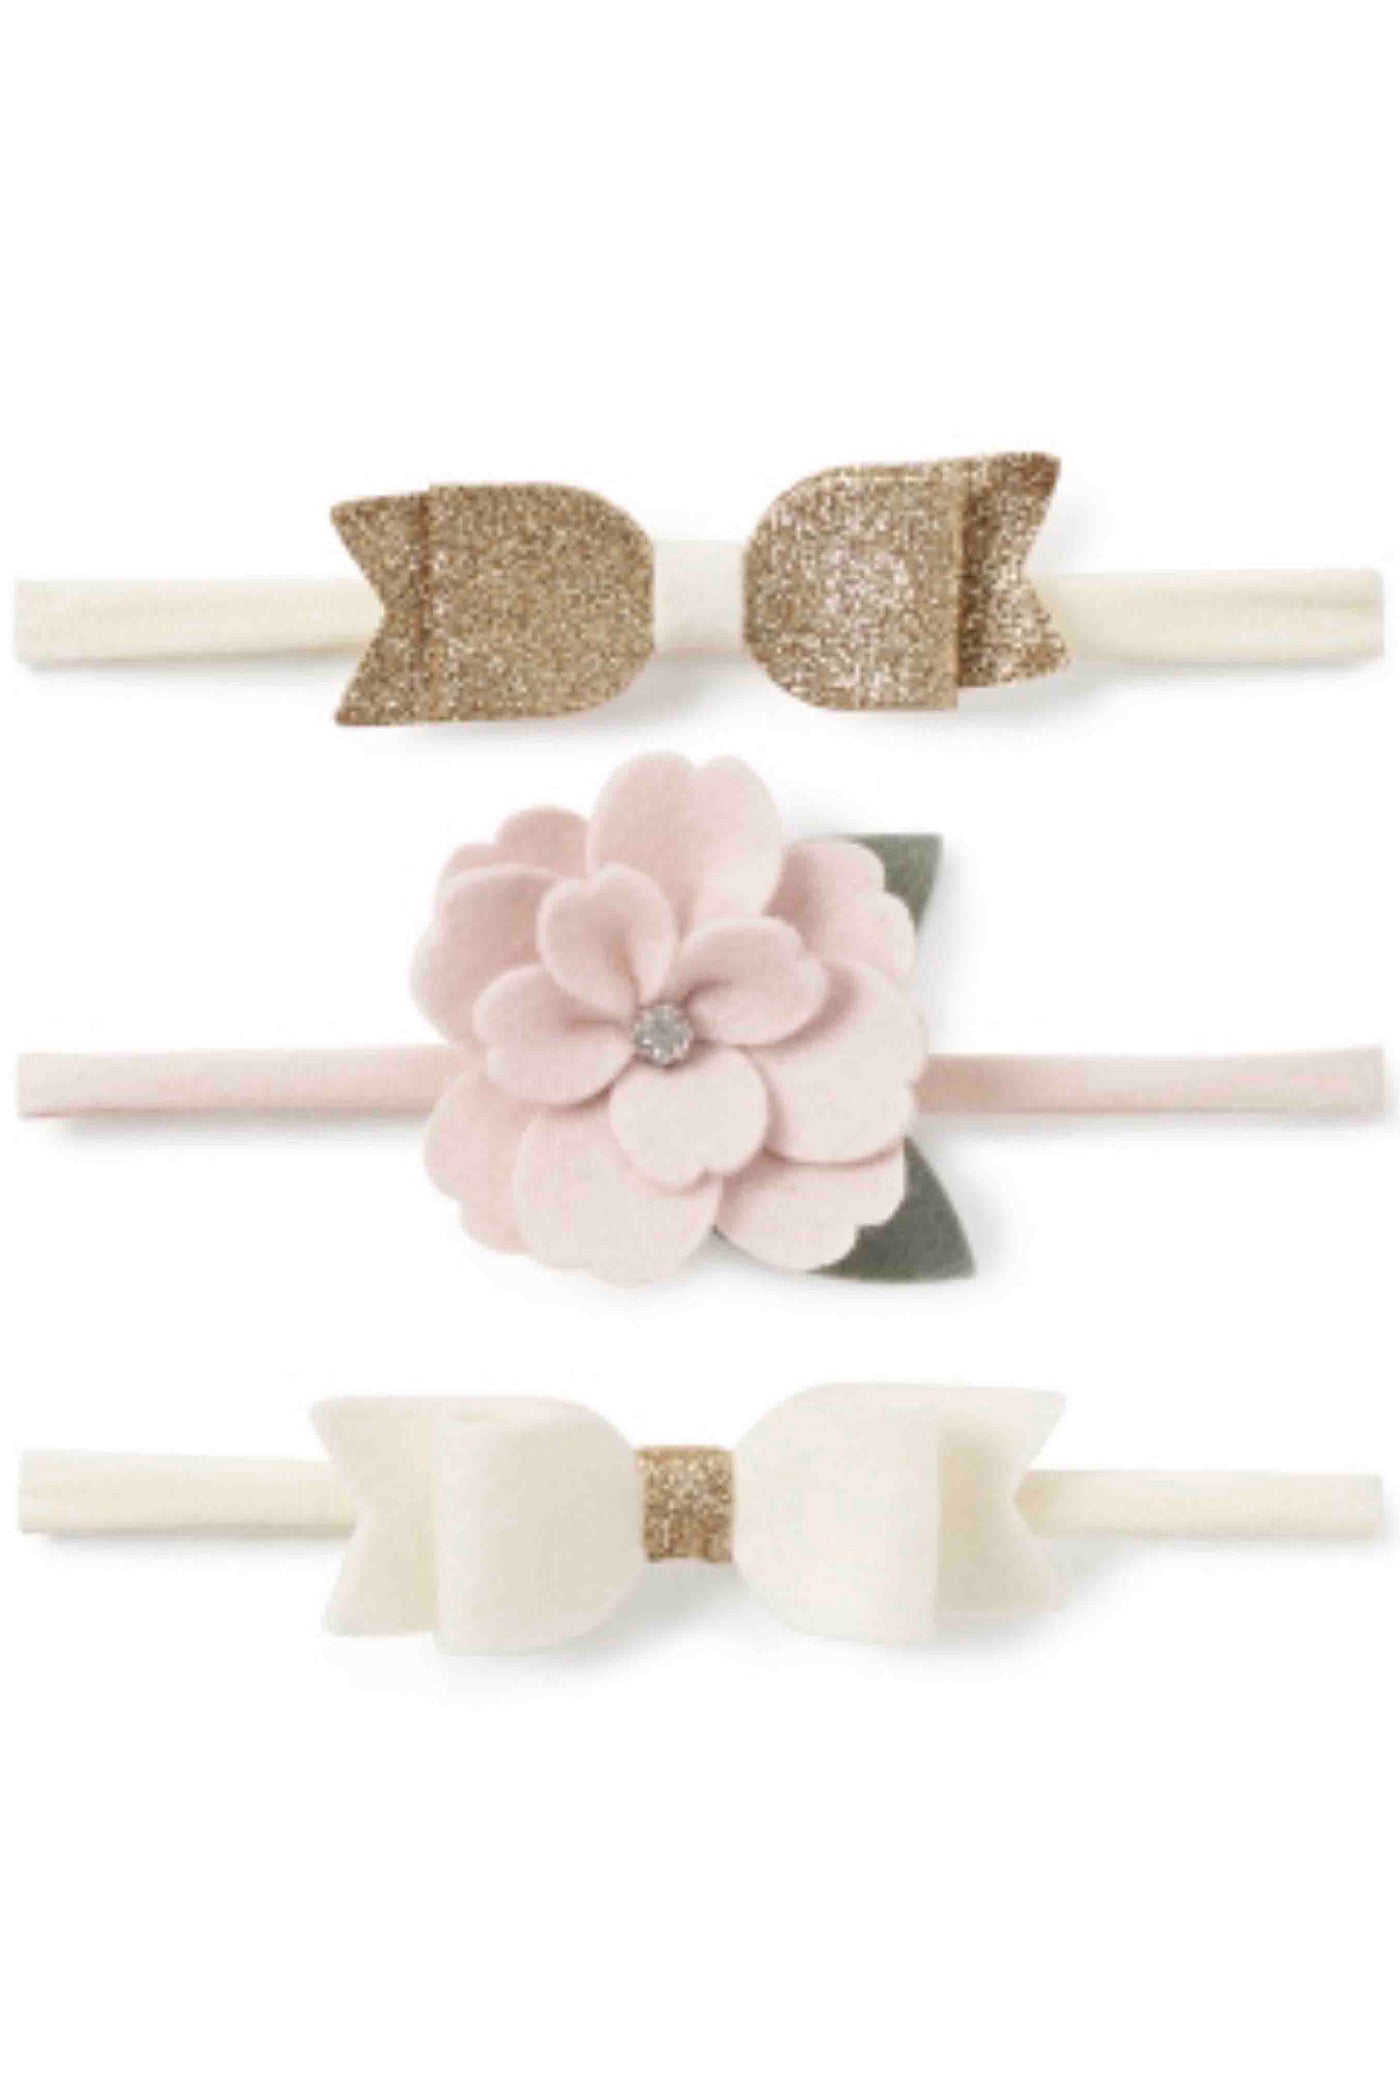 3 pack of Flowers and Bows Headbands by Elegant Baby